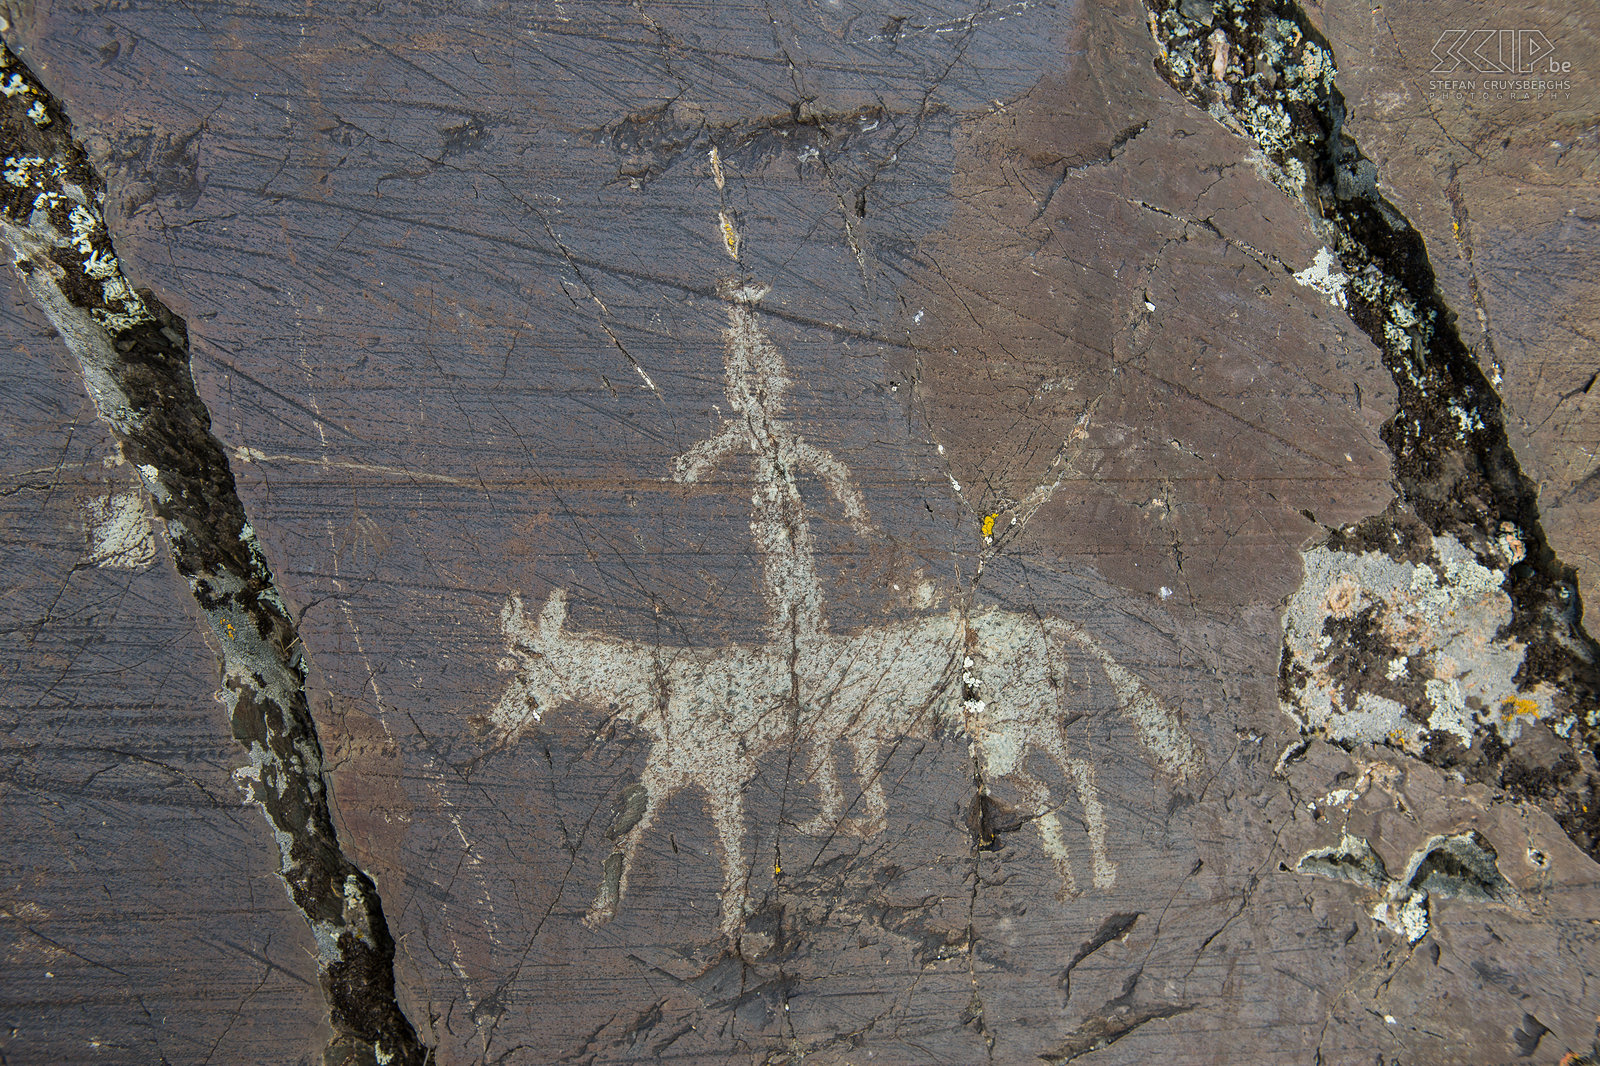 Altai Tavan Bogd - Prehistoric rock art These prehistoric rock paintings also include hunting scenes with people riding horses. Stefan Cruysberghs